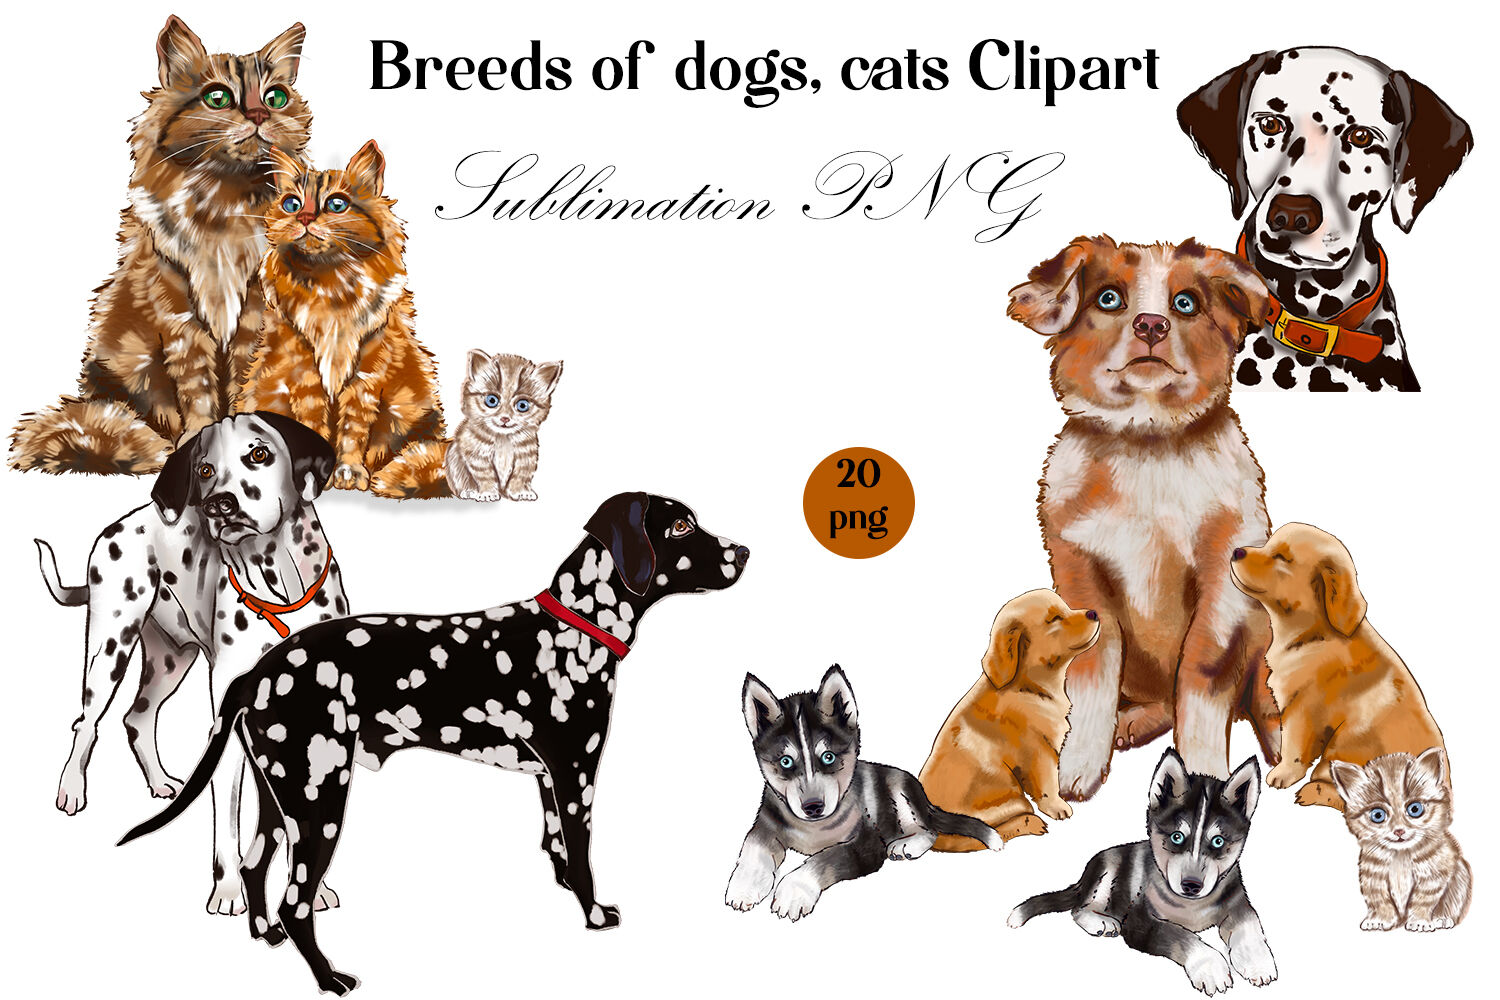 Breeds of dogs, cats Clipart | Sublimation dog PNG By Elenazlata_Art ...